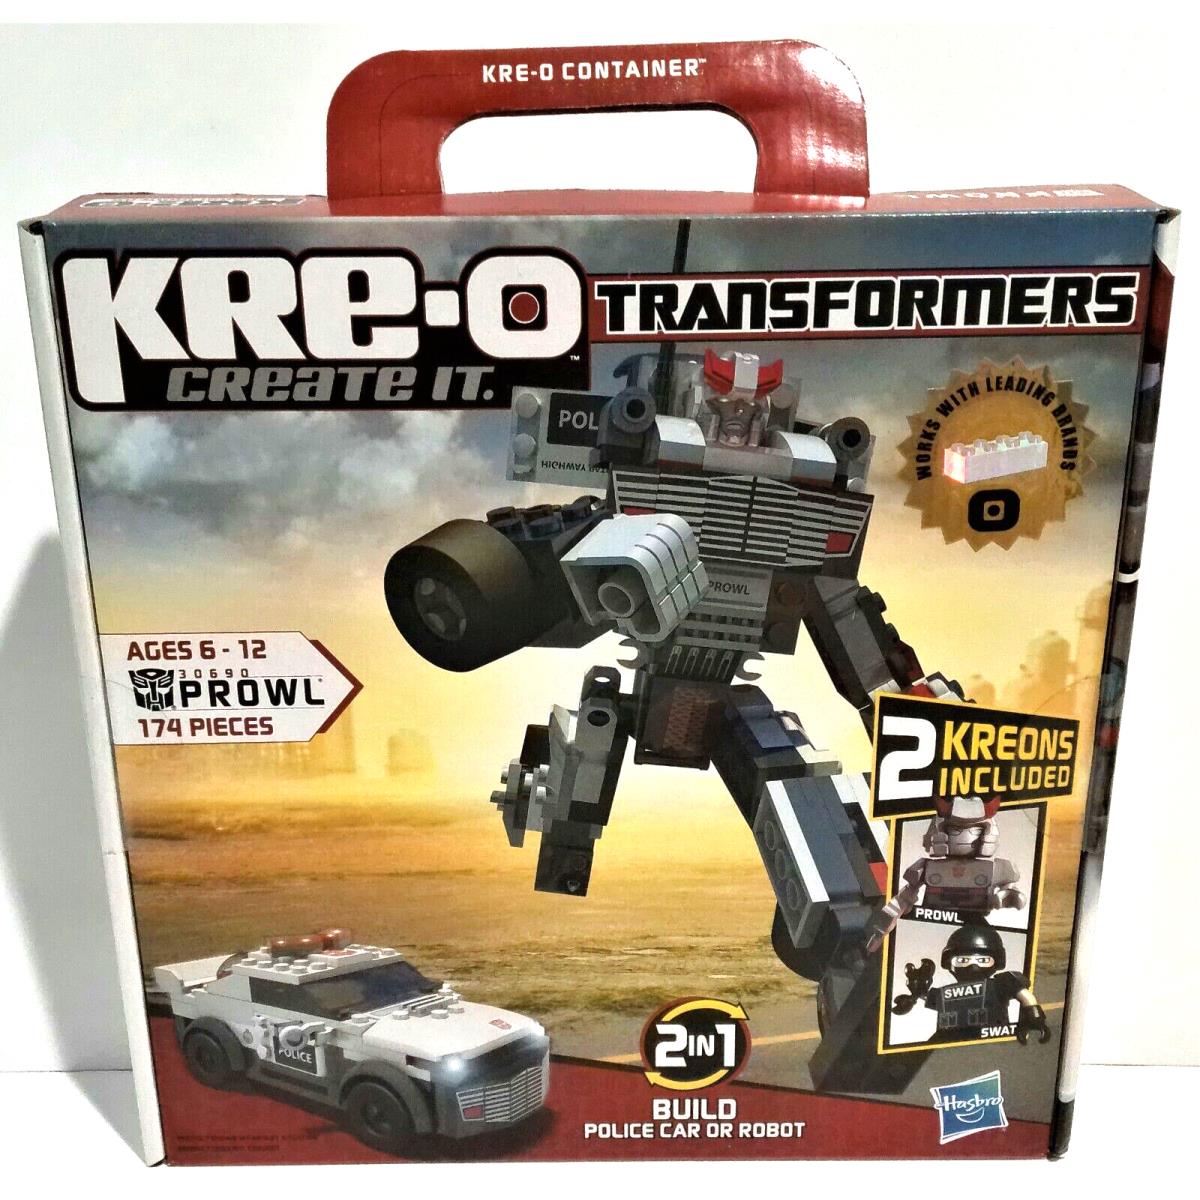 Kre-o Create IT Transformers 30690 Prowl 2 IN 1 Build Police Car or Robot Misb